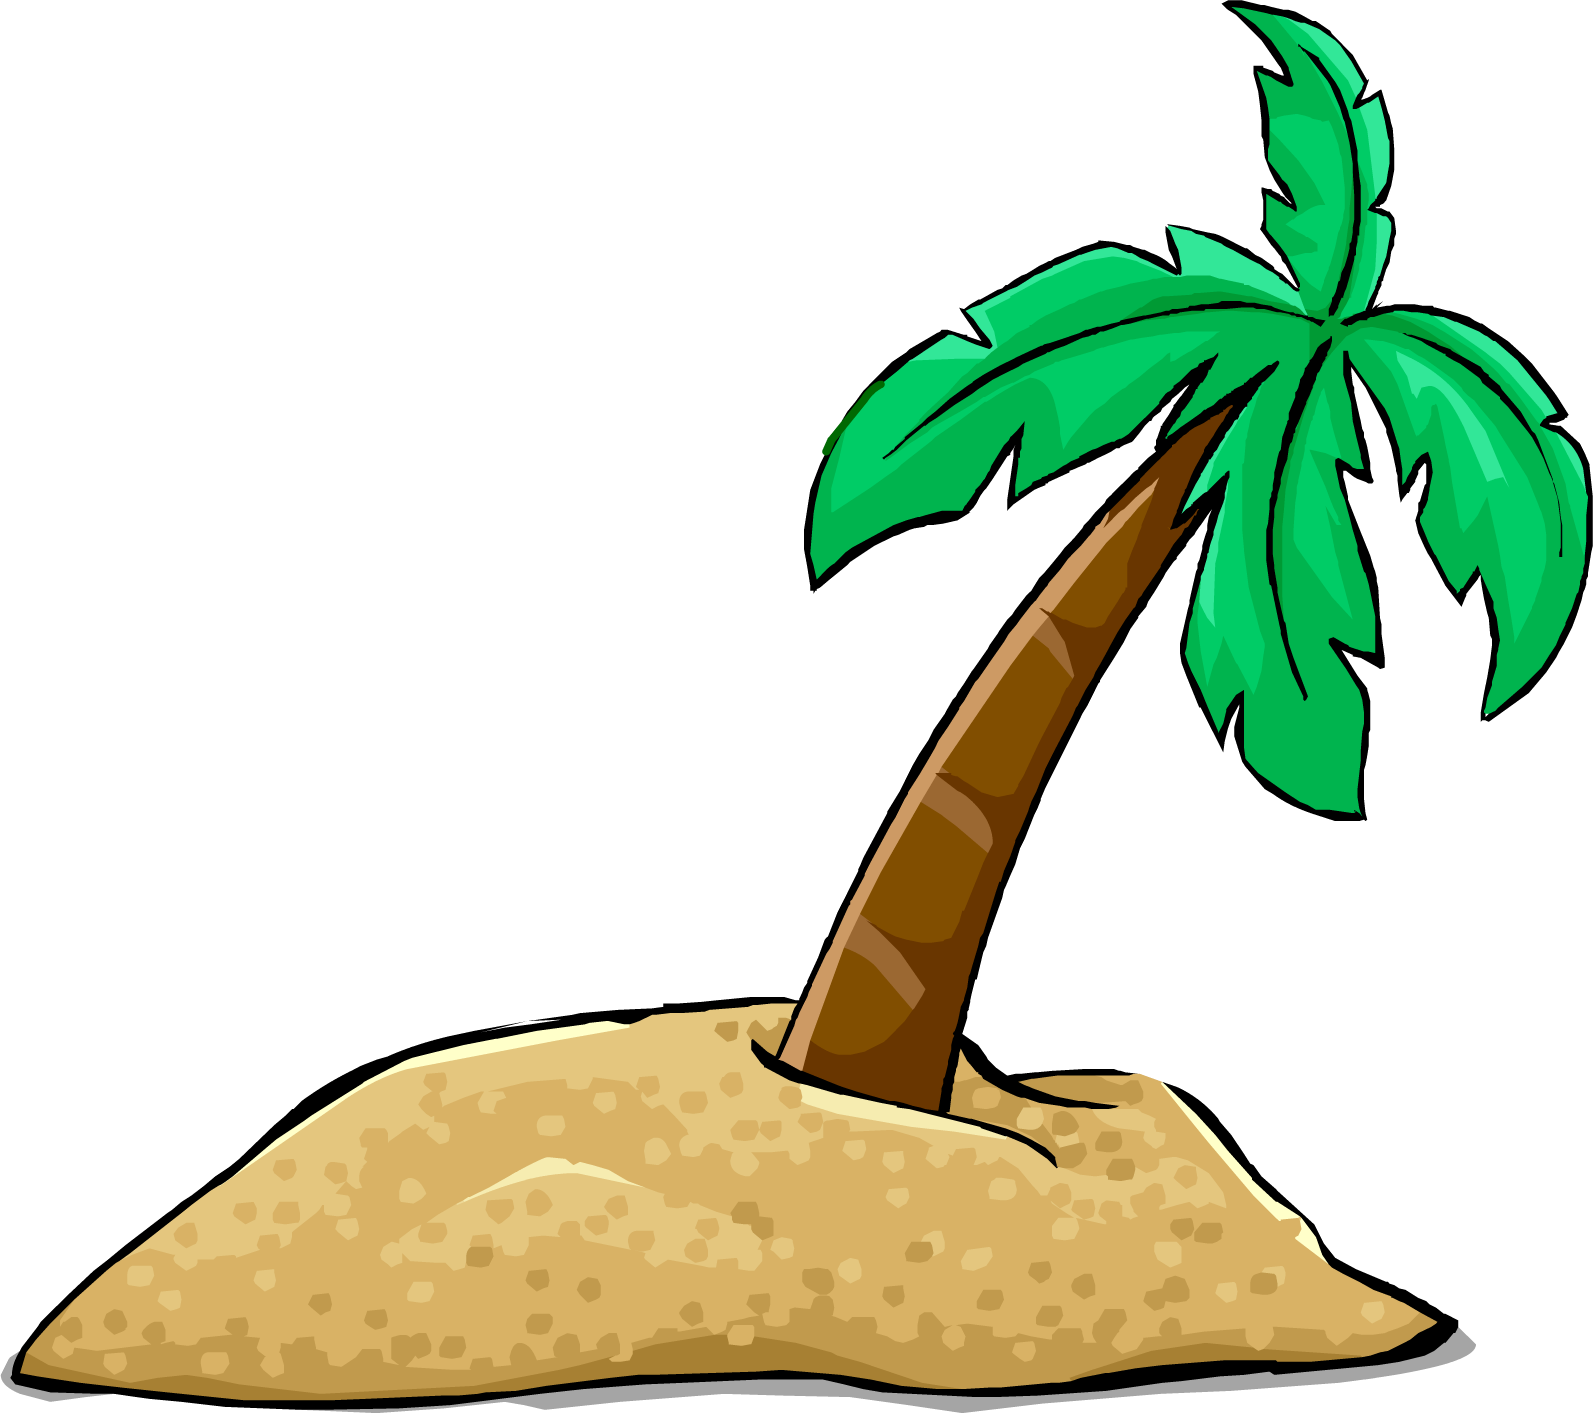 Island PNG HD and HQ Image - Island Png